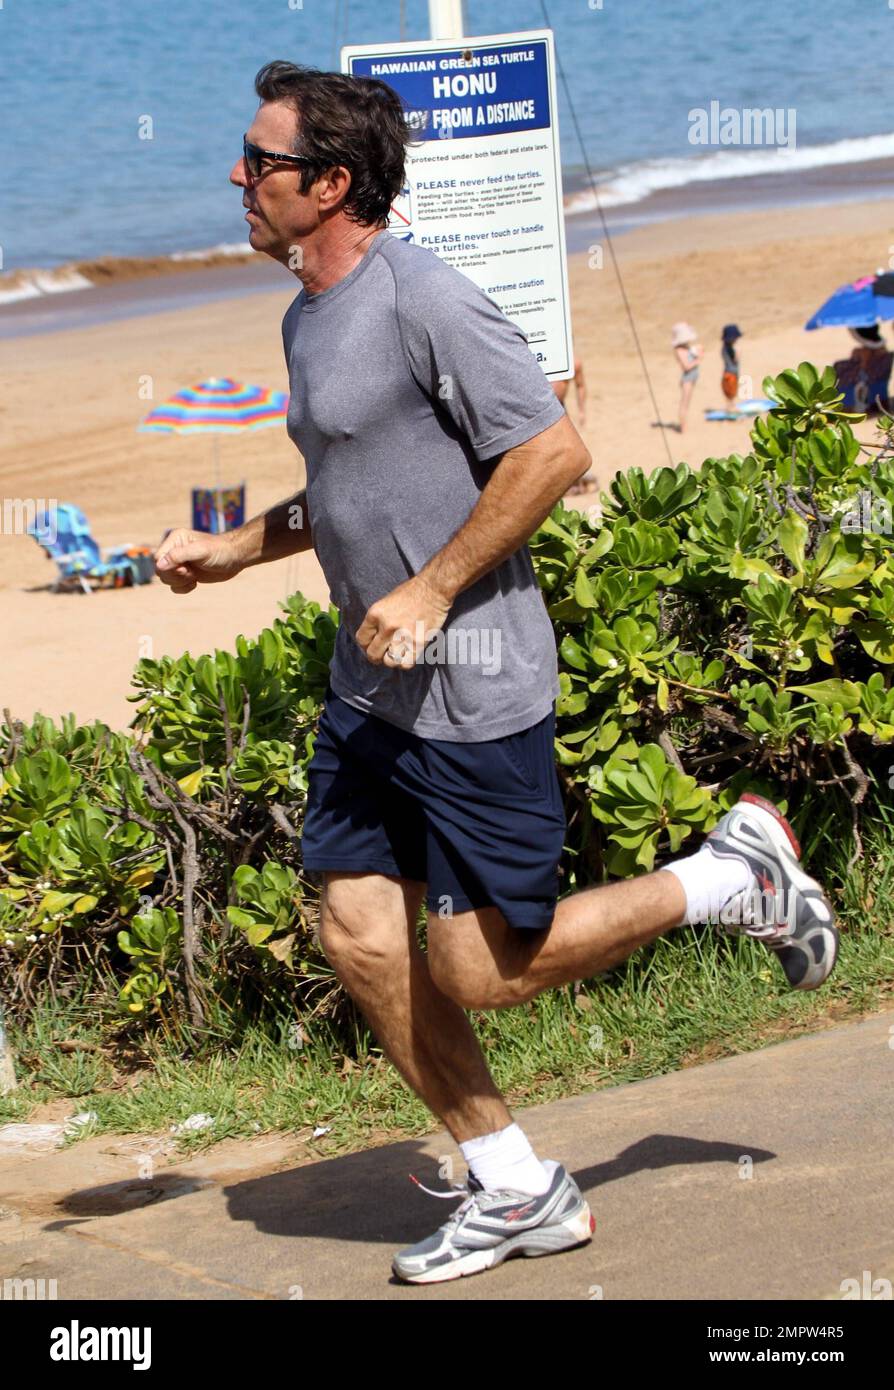 Hunky actor Dennis Quaid and wife Kimberly Buffington keep up their fit physiques with a jog during a Hawaiian holiday. Quaid, who reportedly put his Montana ranch up for sale earlier this week, recently said he dreams of moving to Hawaii to spend more time surfing. The 57-year-old 'Footloose' star first came to love surfing when filming the movie 'Soul Surfer,' which tells the story of shark attack victim Bethany Hamilton. Maui, HI. 26th October 2011.   . Stock Photo